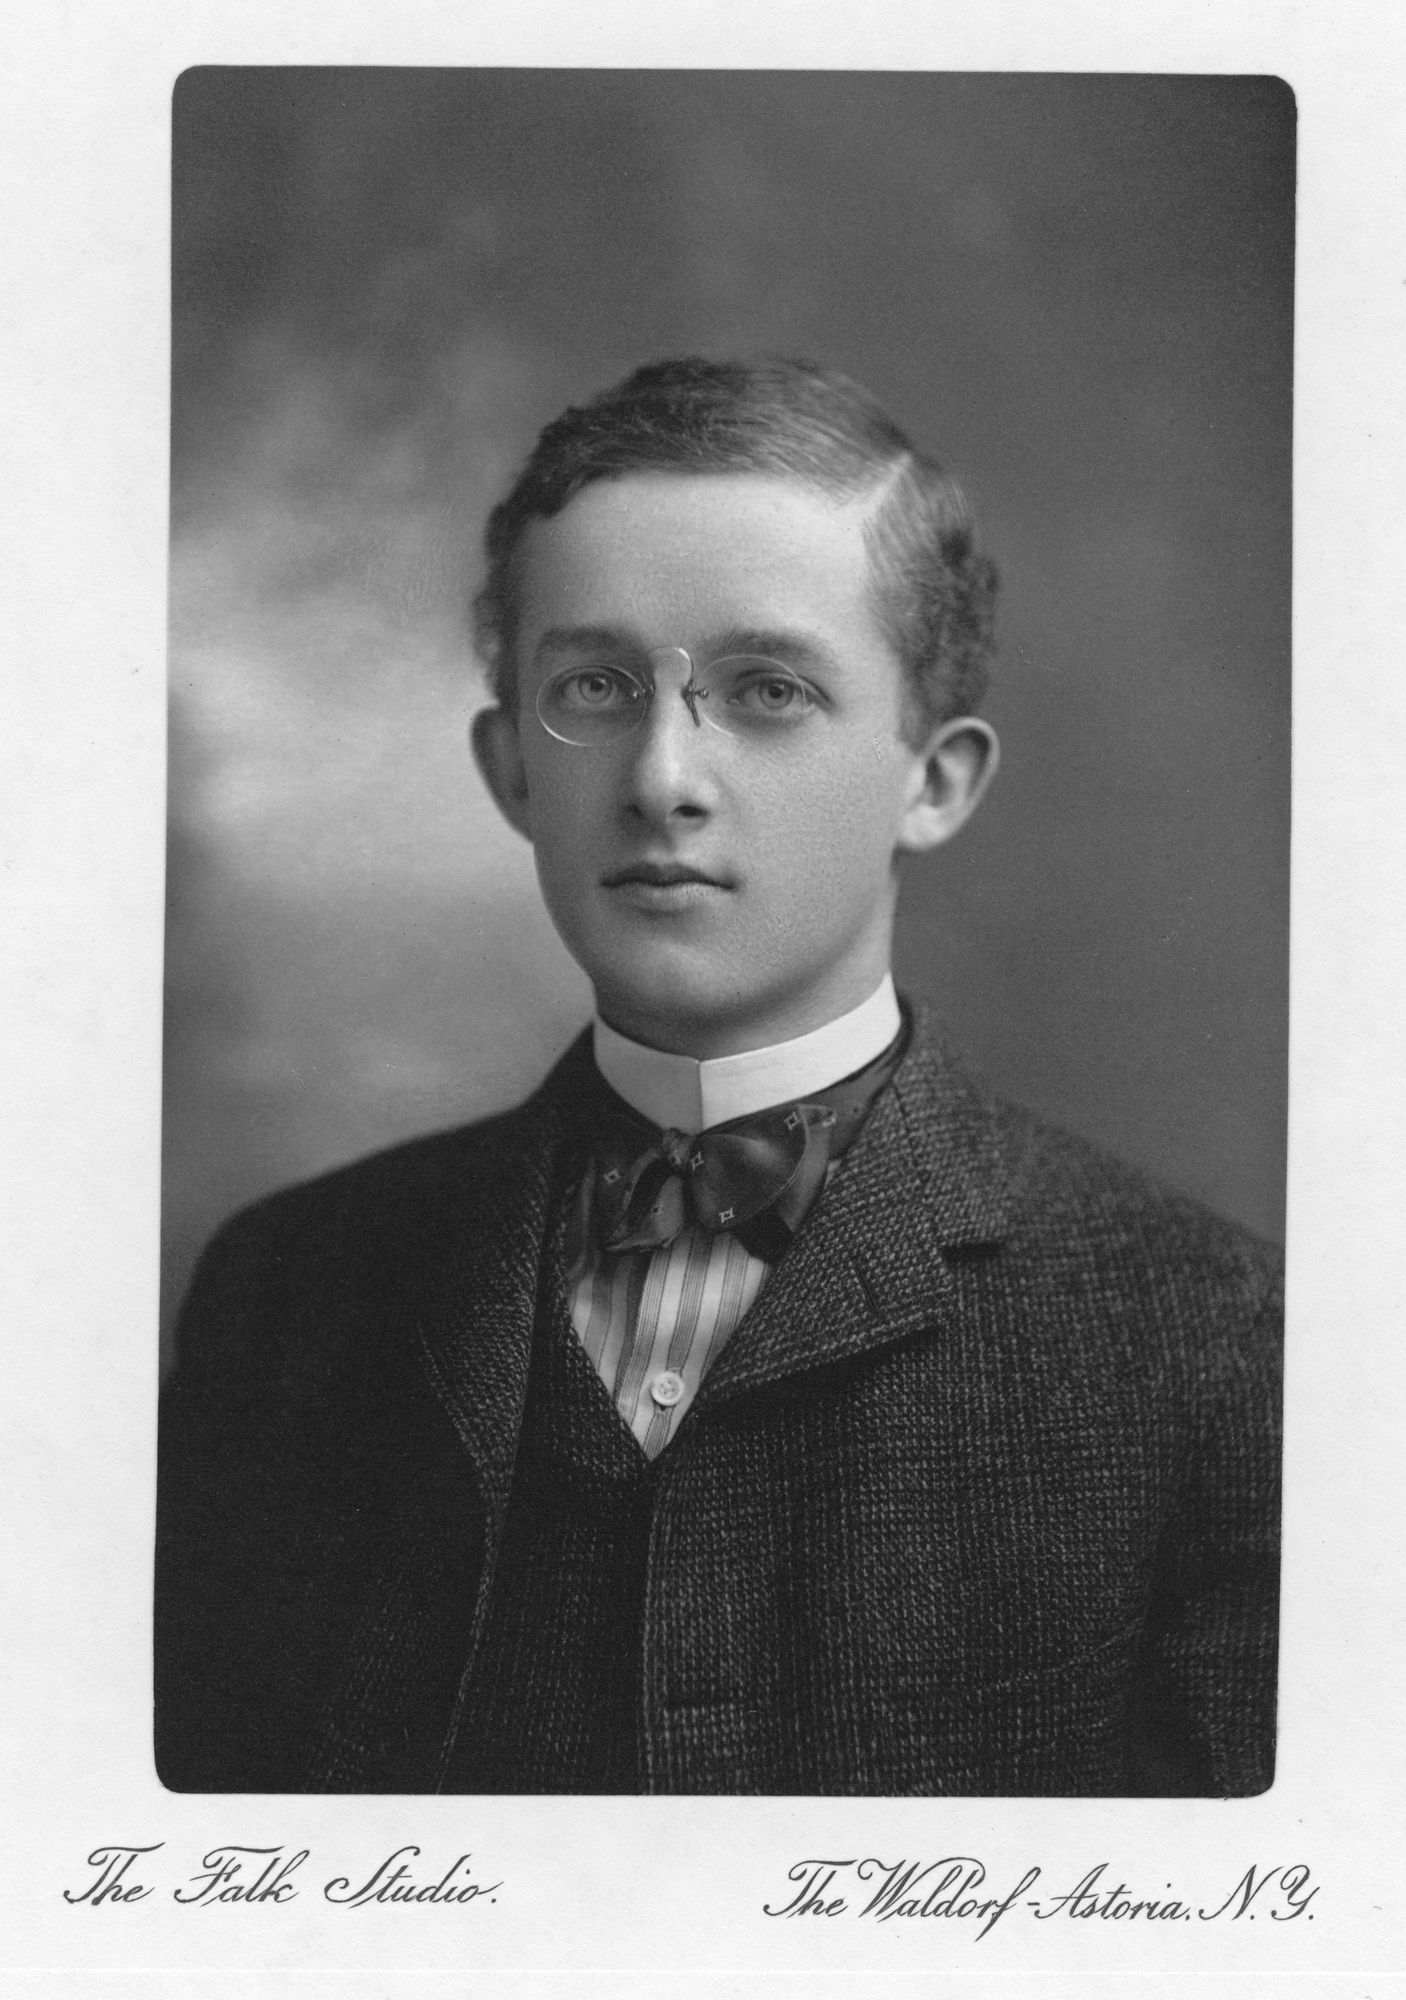 Portrait of Childs Frick, a young man wearing glasses